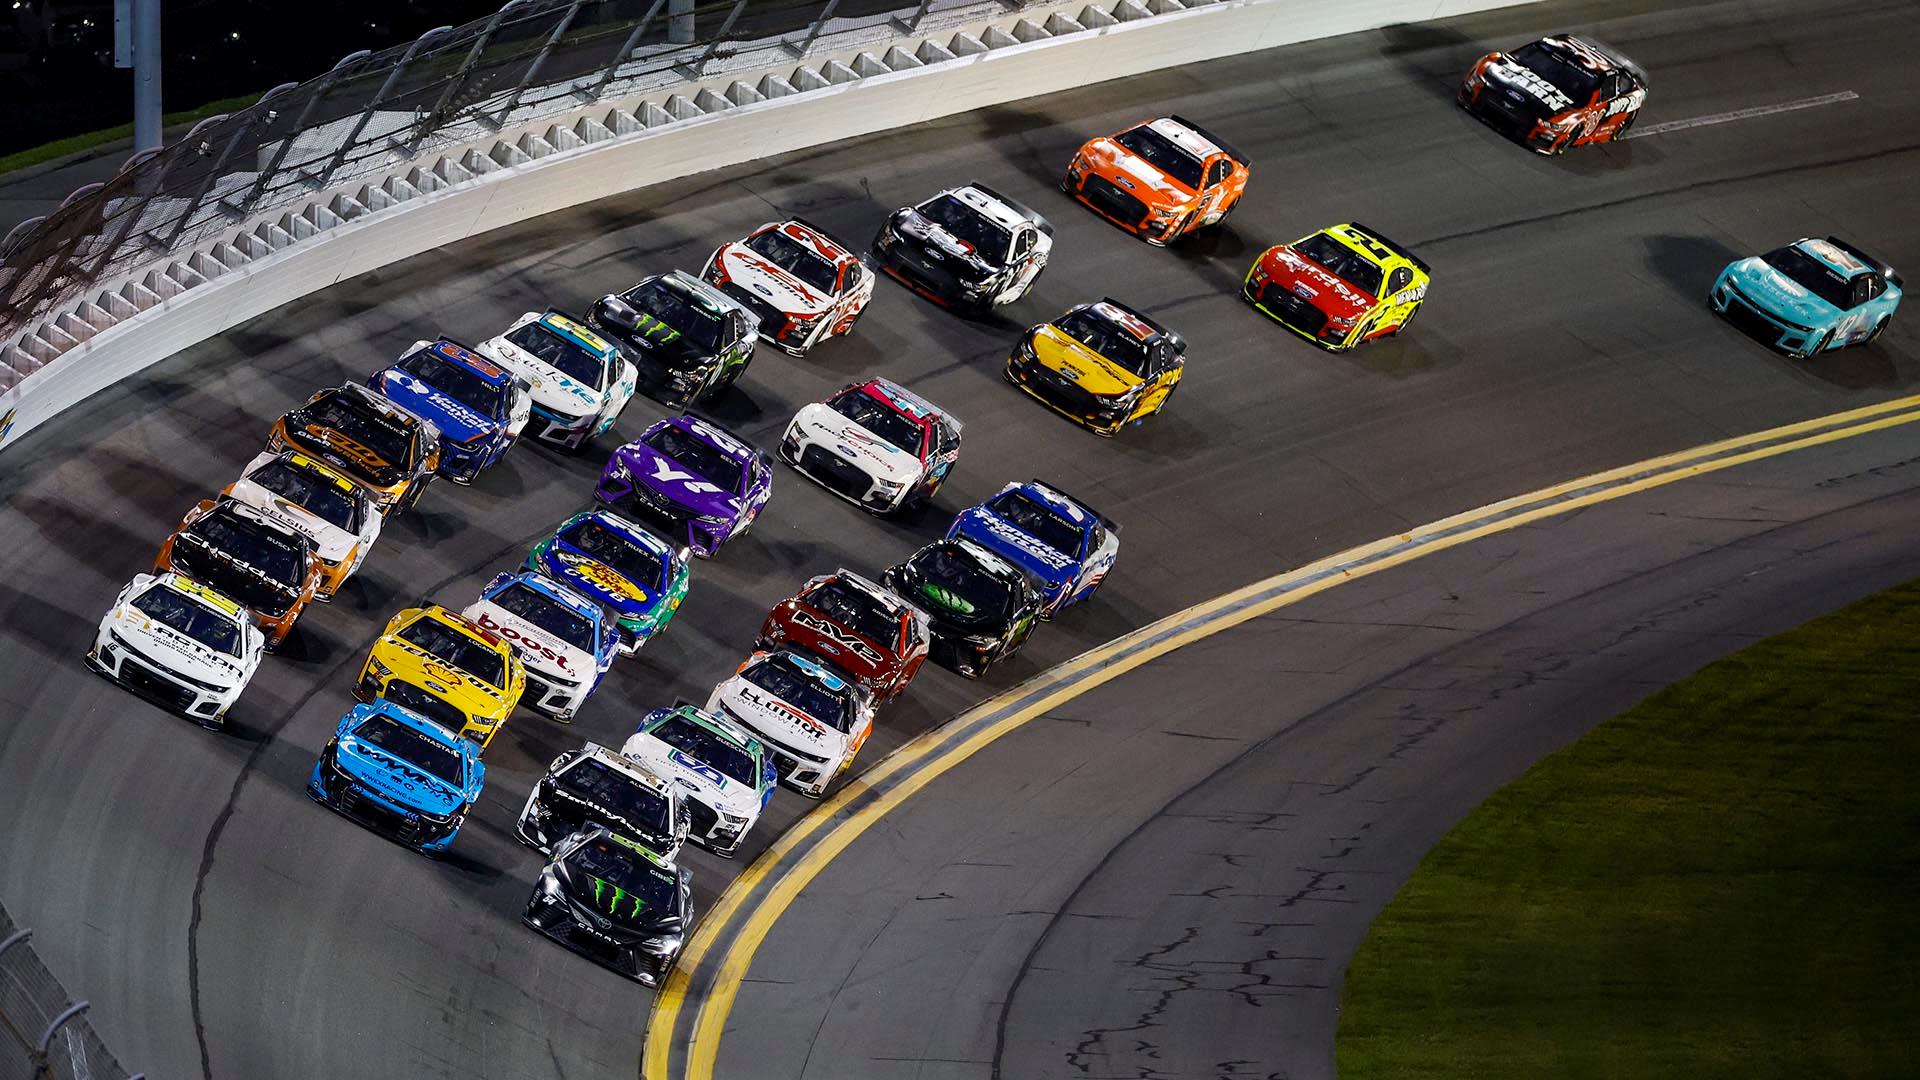 NASCAR results, highlights Buescher wins at Daytona, Preece has scary wreck, Wallace advances to playoff